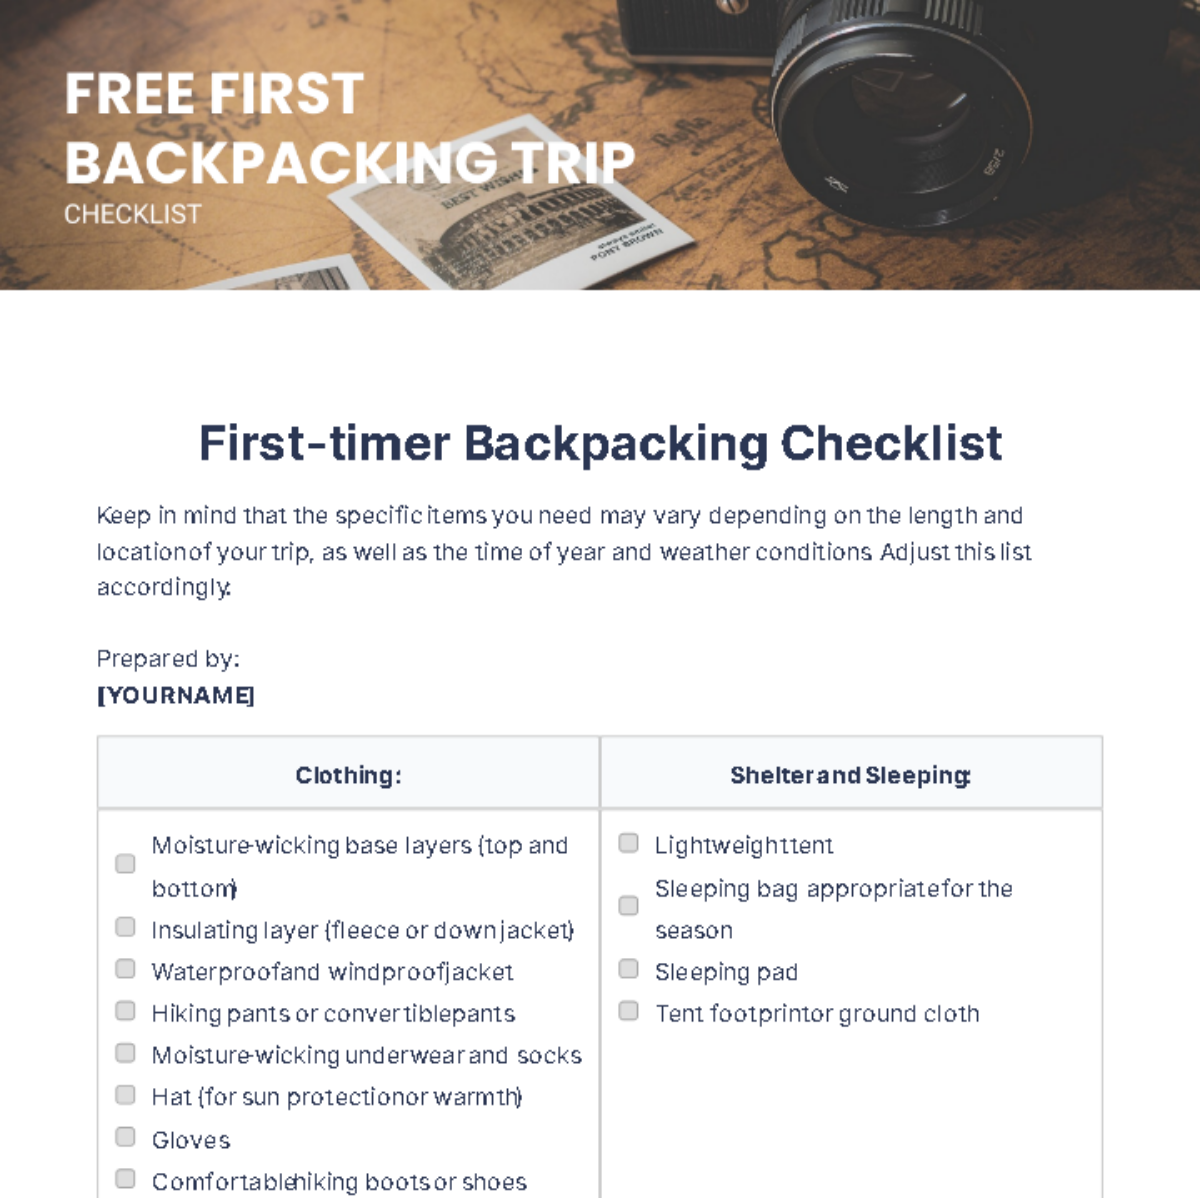 Free First Backpacking Trip Checklist Template